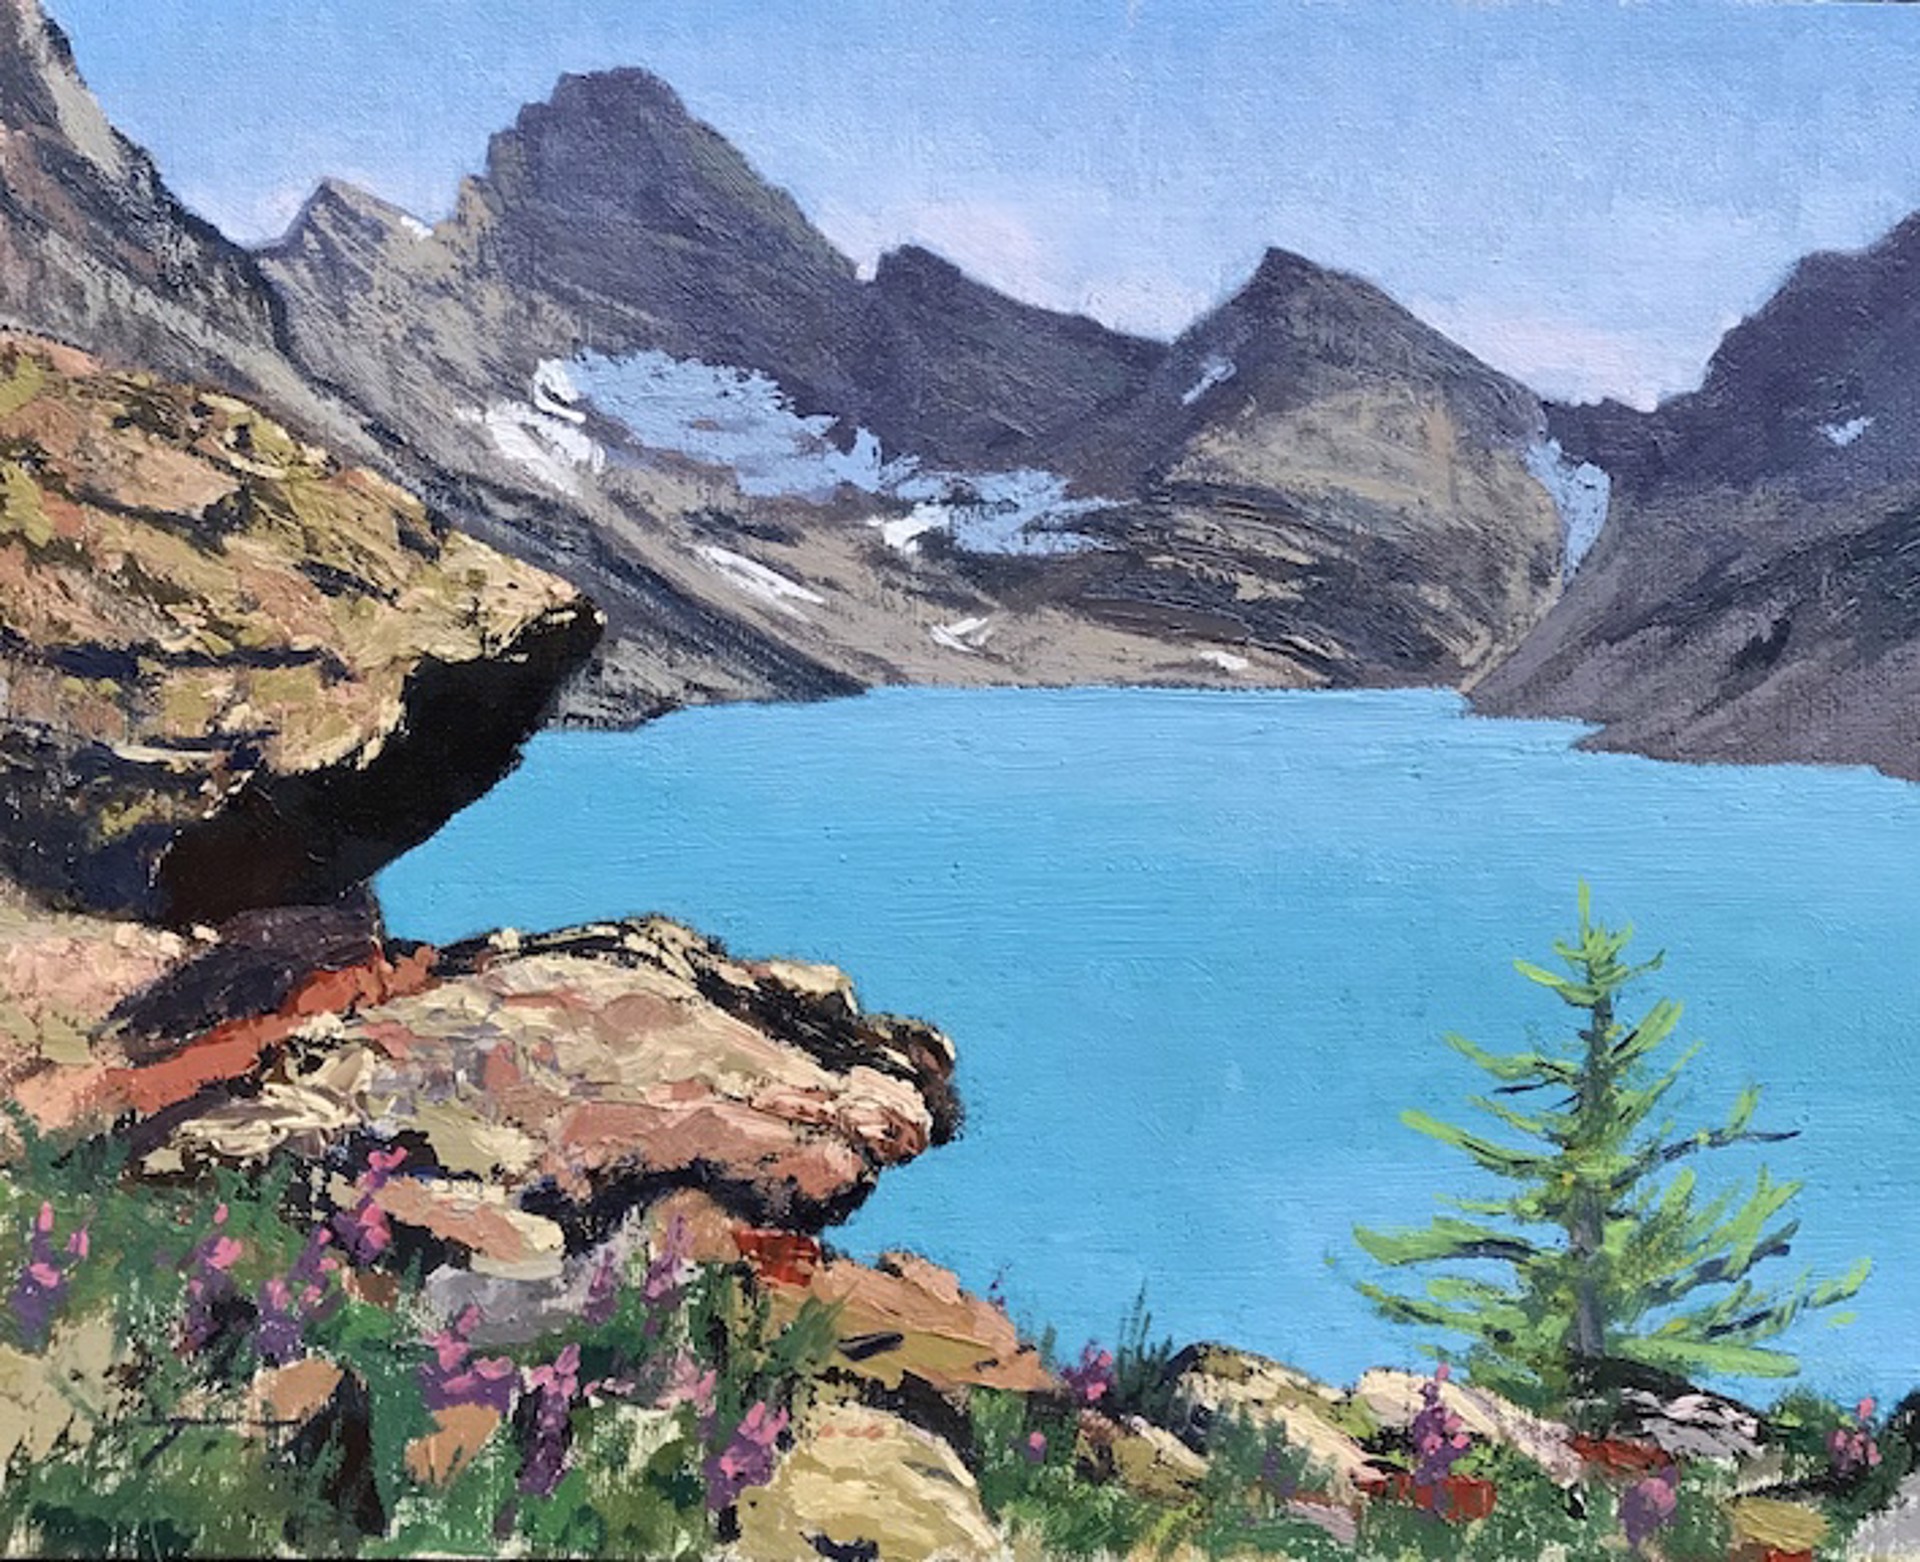 Summer Day, Lake McArthur by Todd Lachance